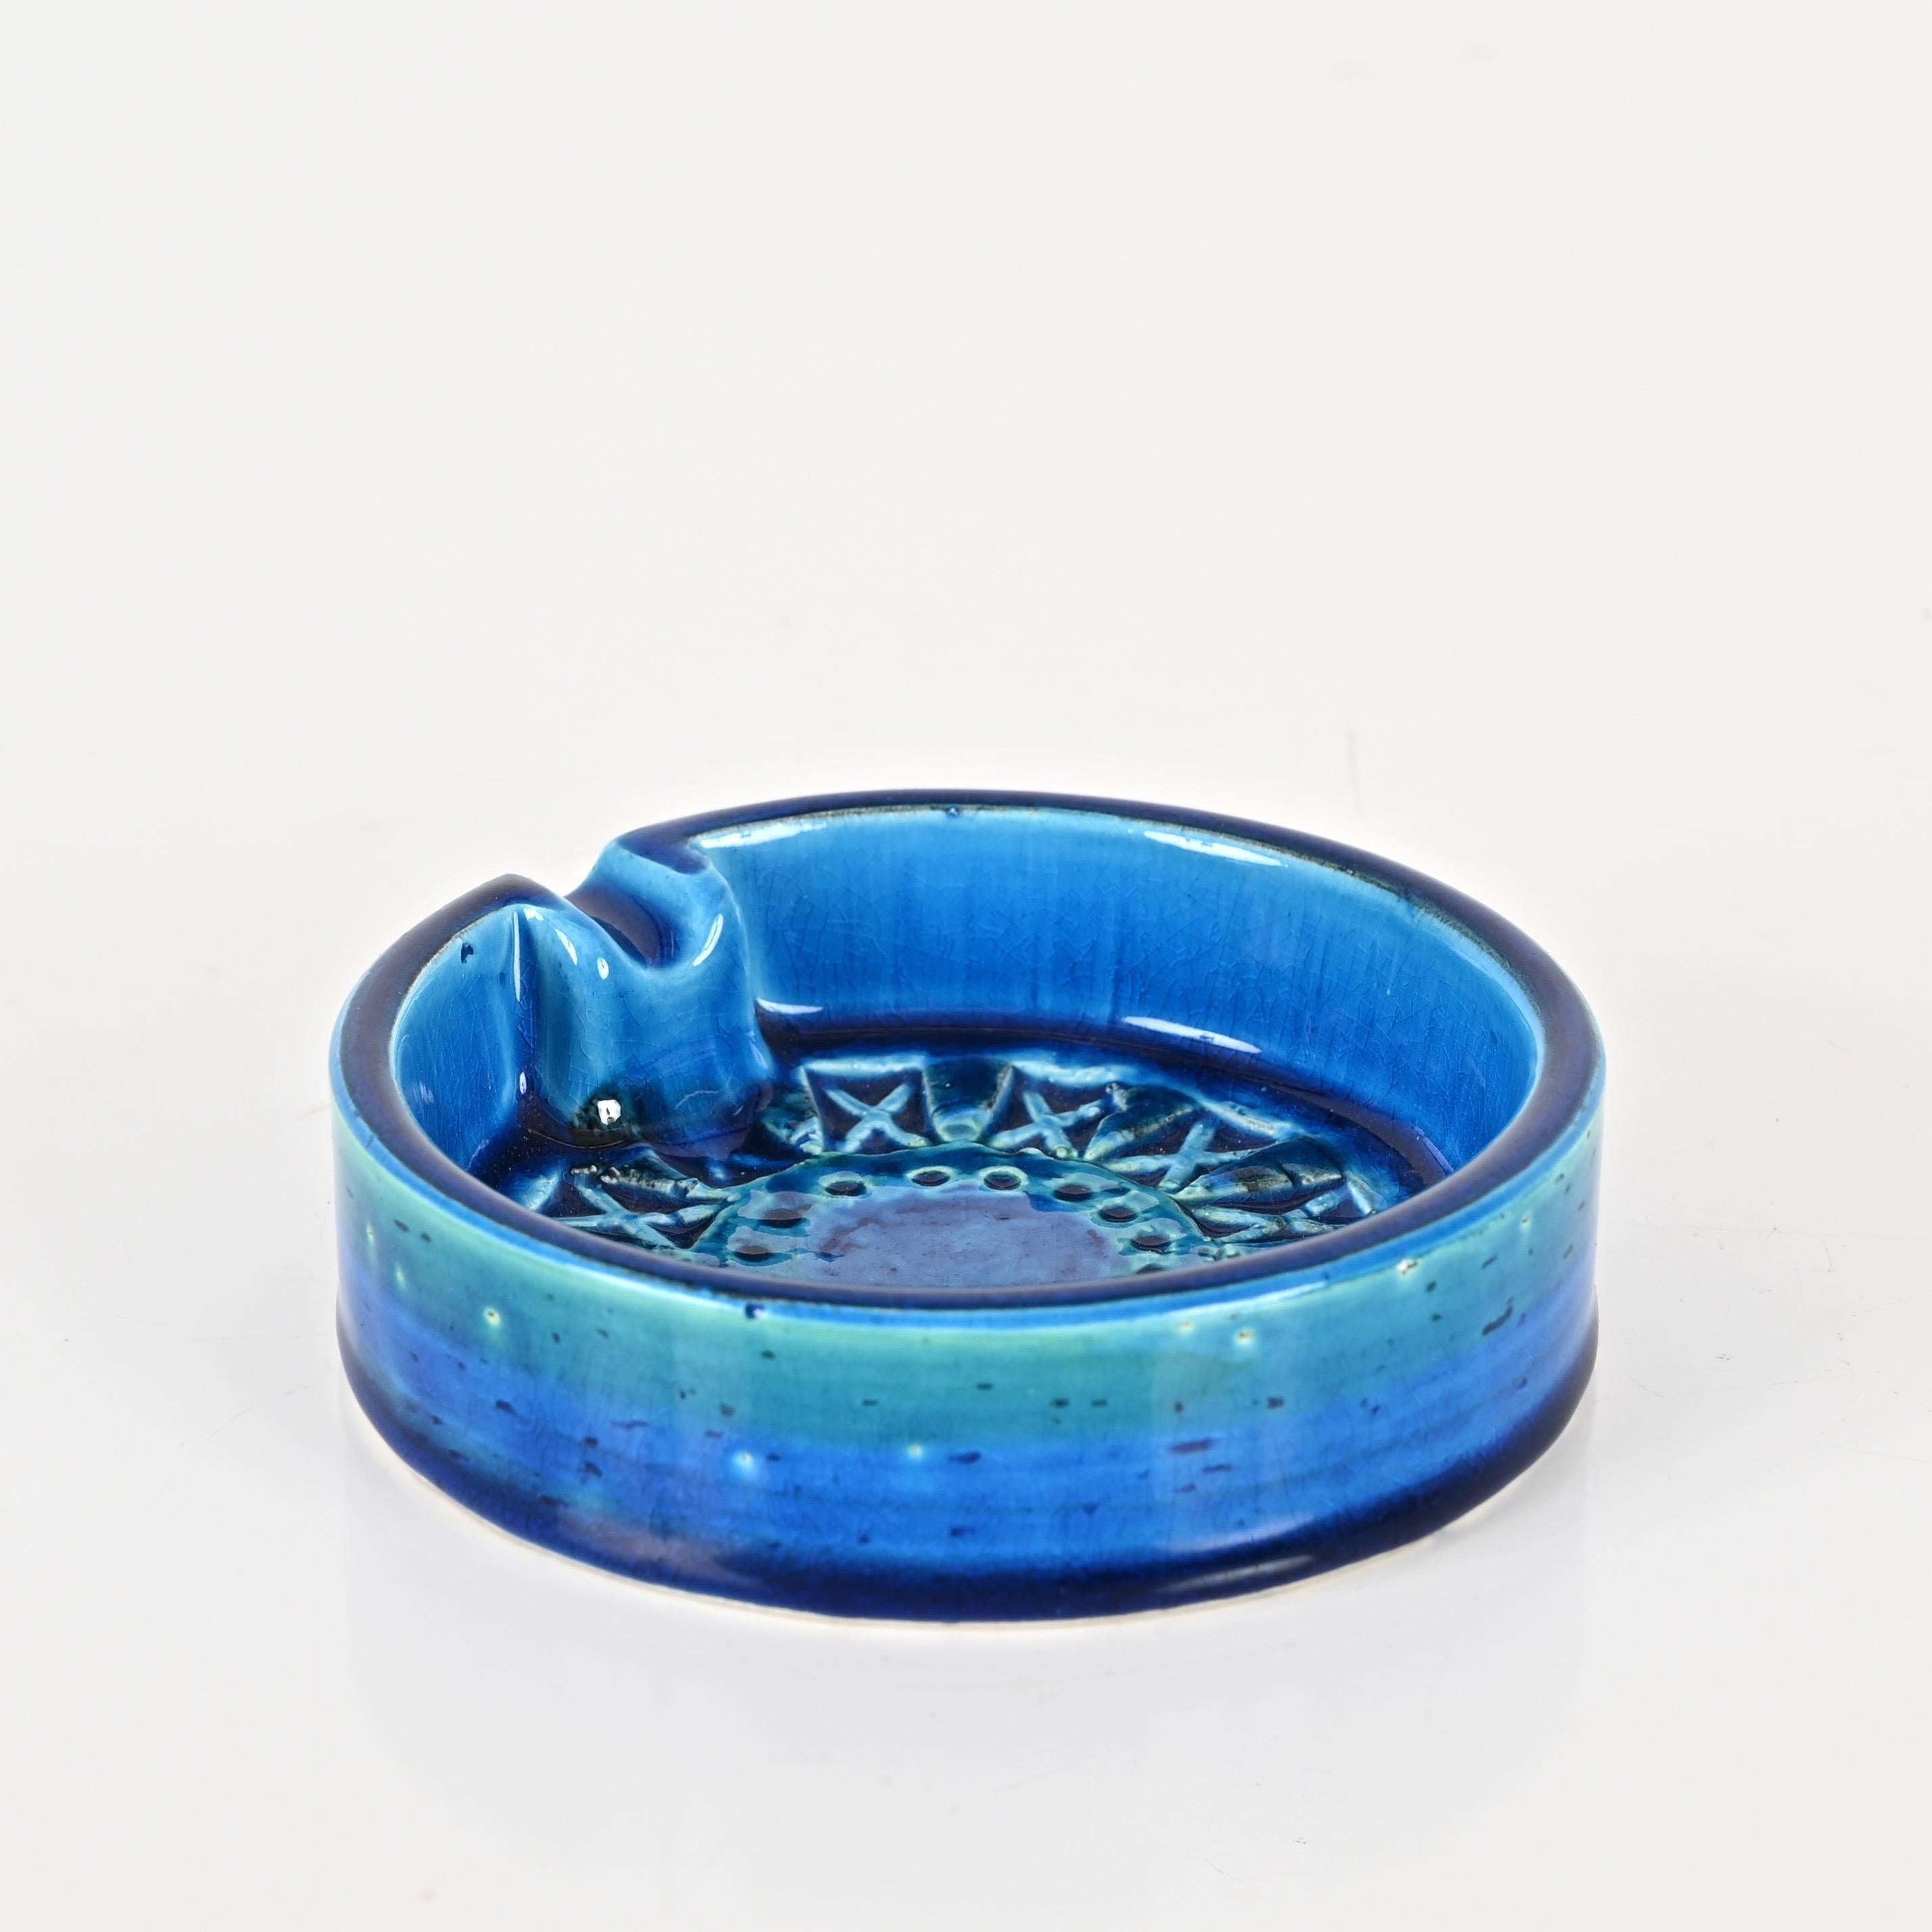 Mid-Century Modern Midcentury Ashtray by Montelupo in Blue 